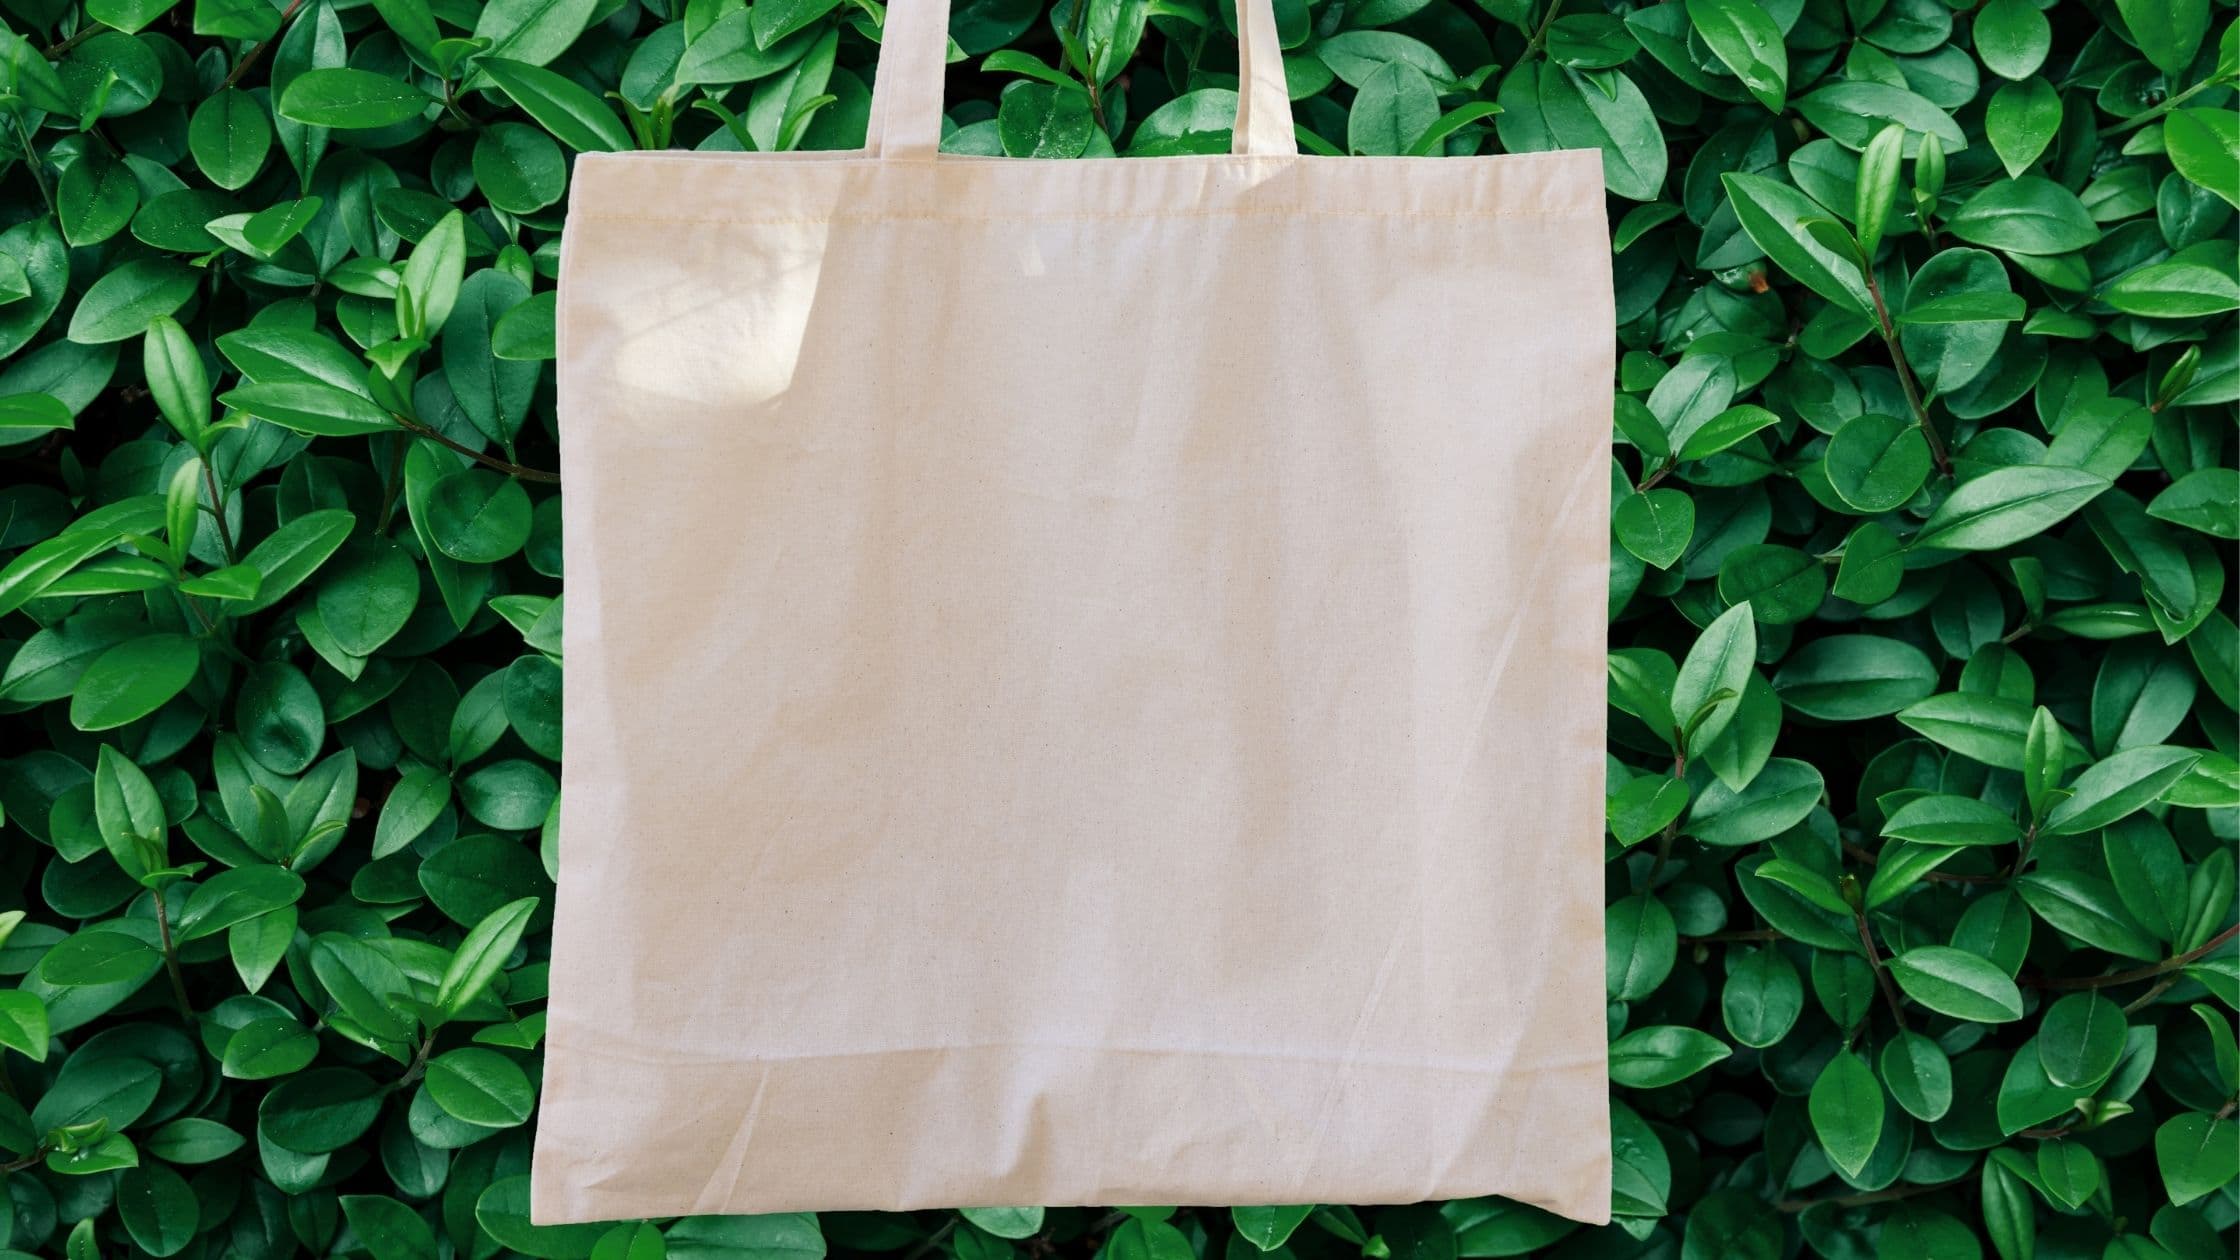 Organic Cotton Tote Bags,Eco Friendly Tote Bags,Chemical Free Tote Bag